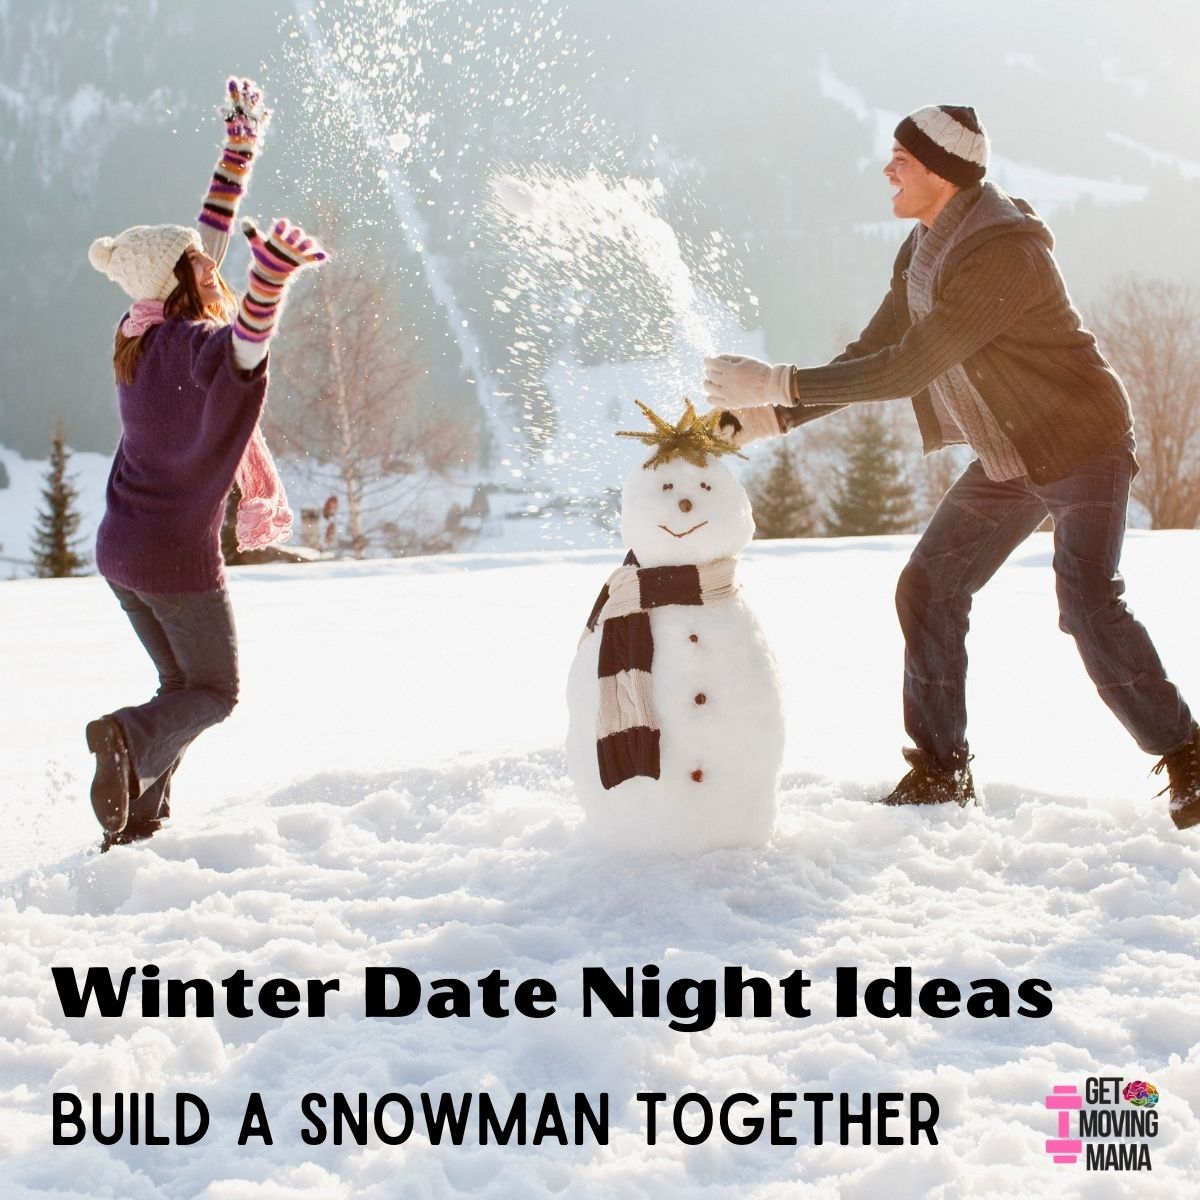 Winter Date Night Ideas Build a Snowman together.